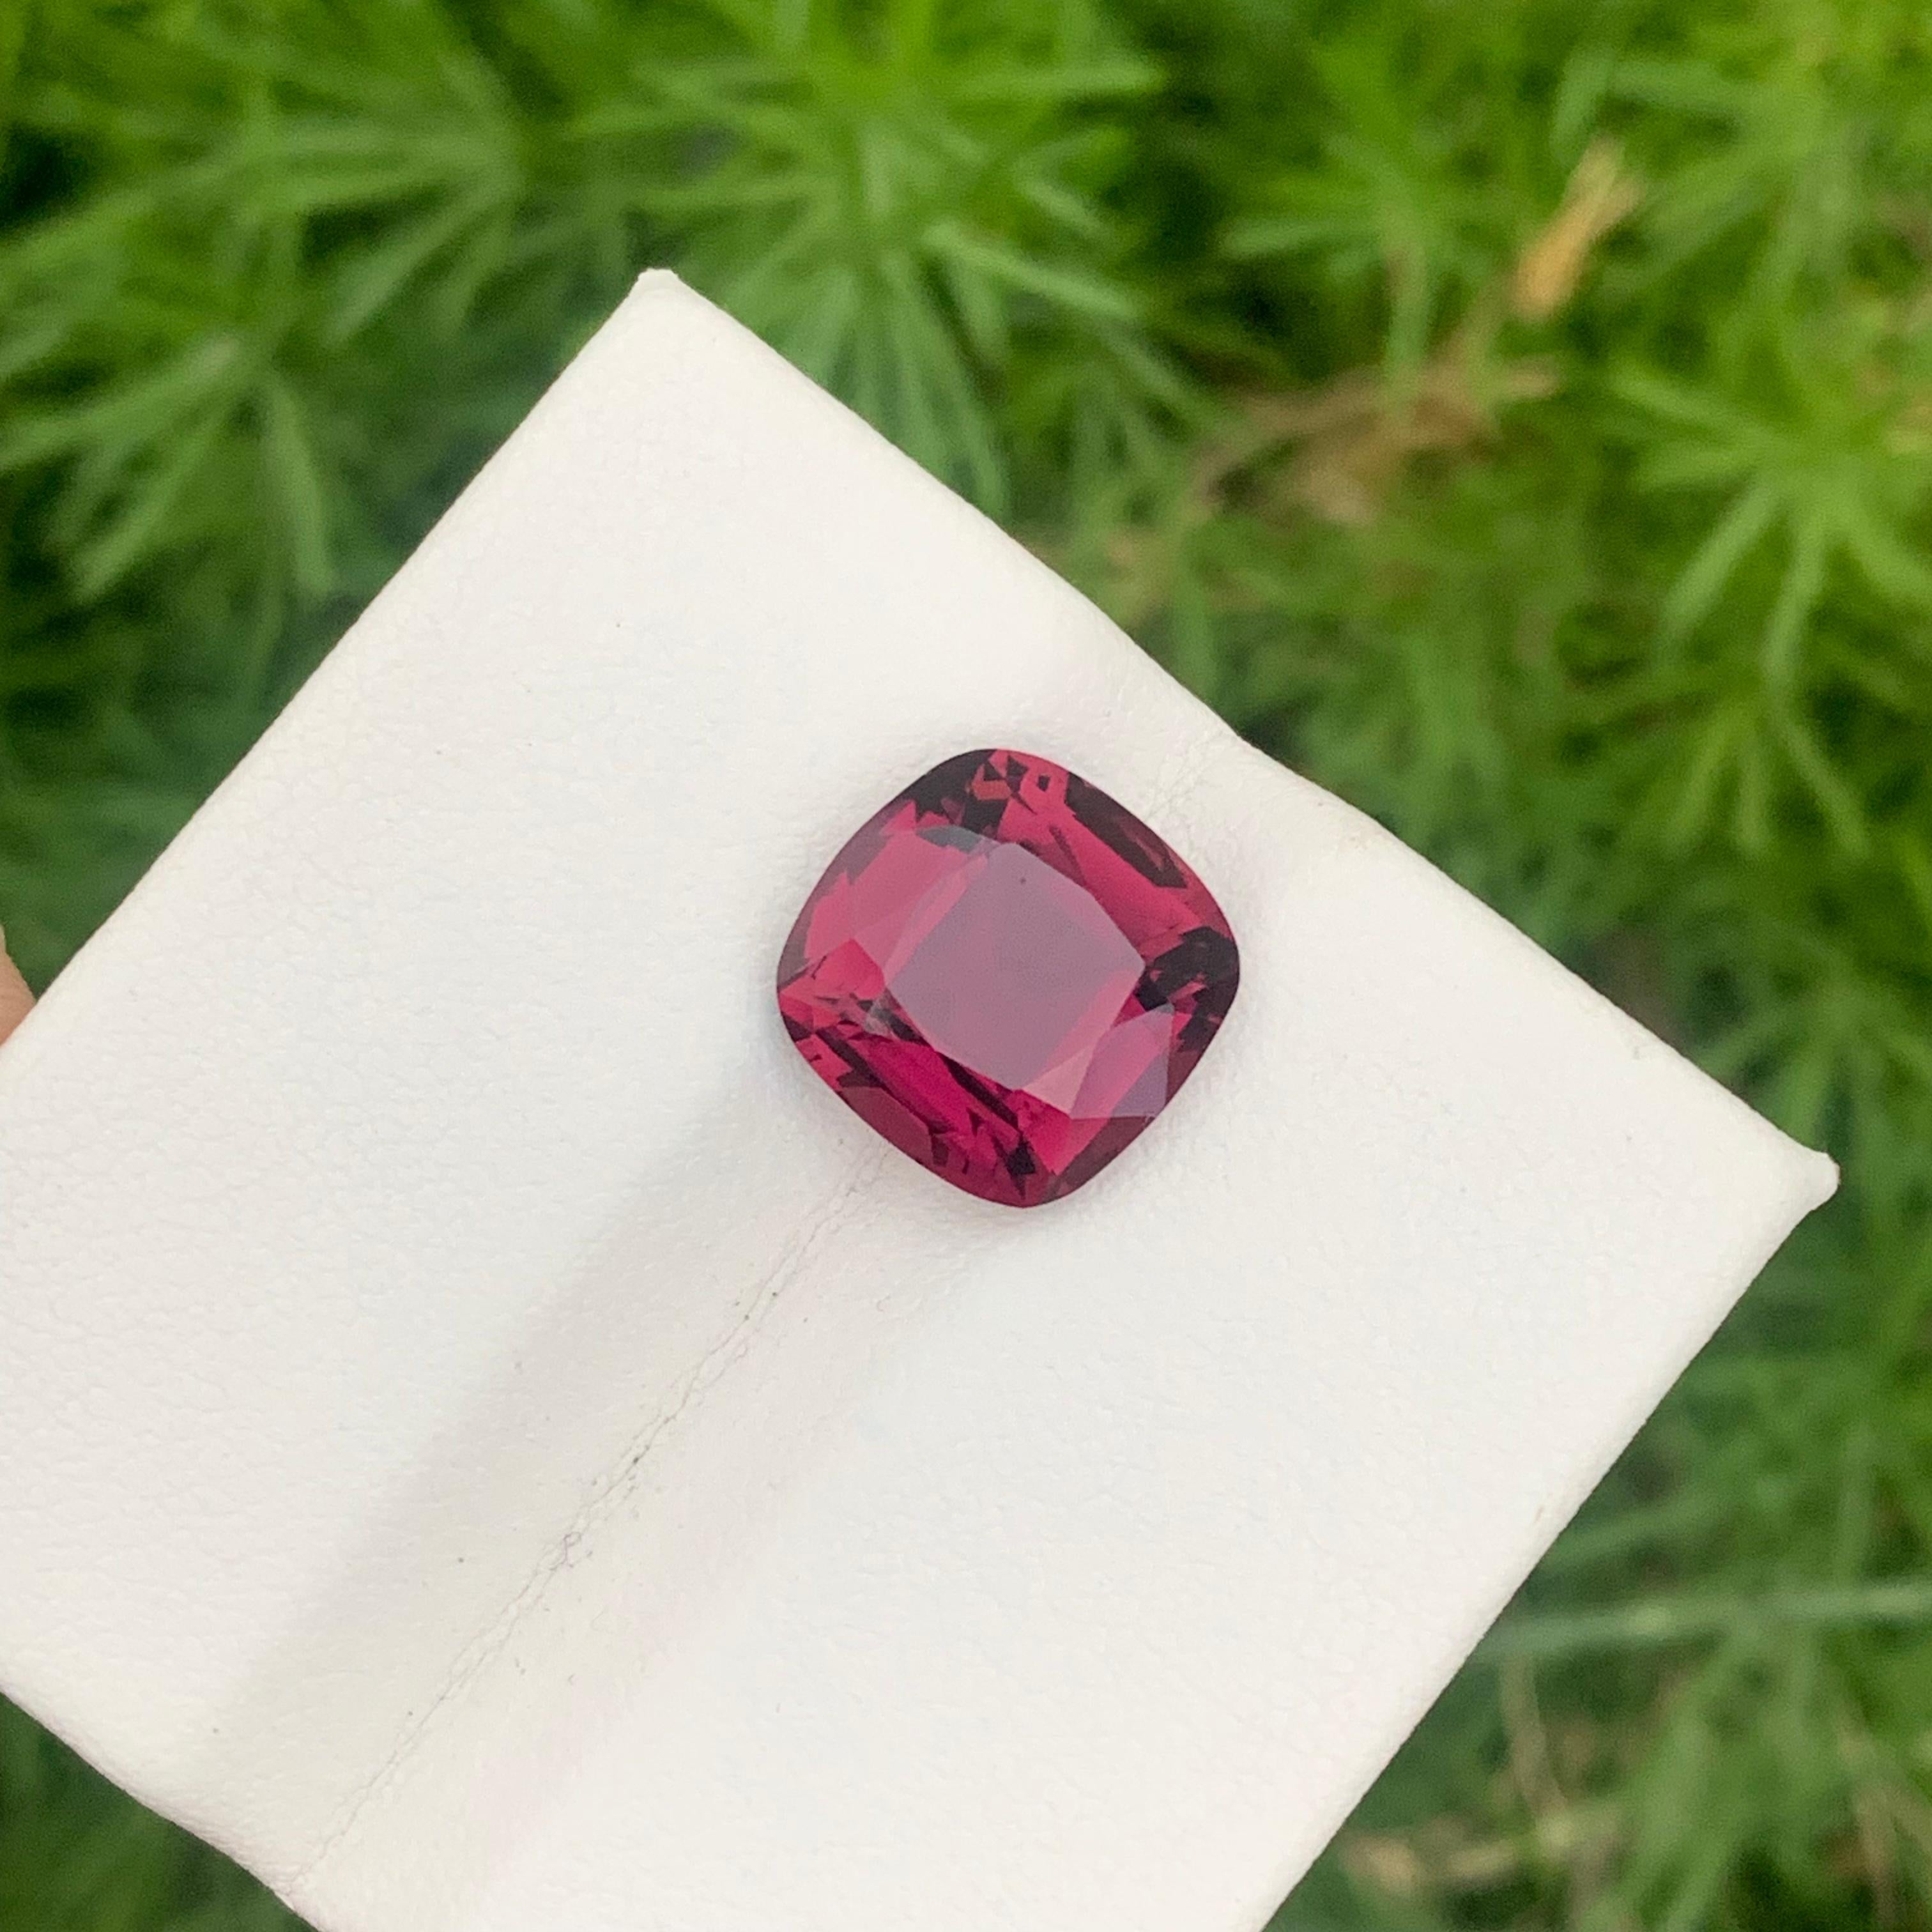 Cushion Cut 5.30 Cts Natural Loose Rubellite Tourmaline Ring Gem From Afghanistan Mine For Sale